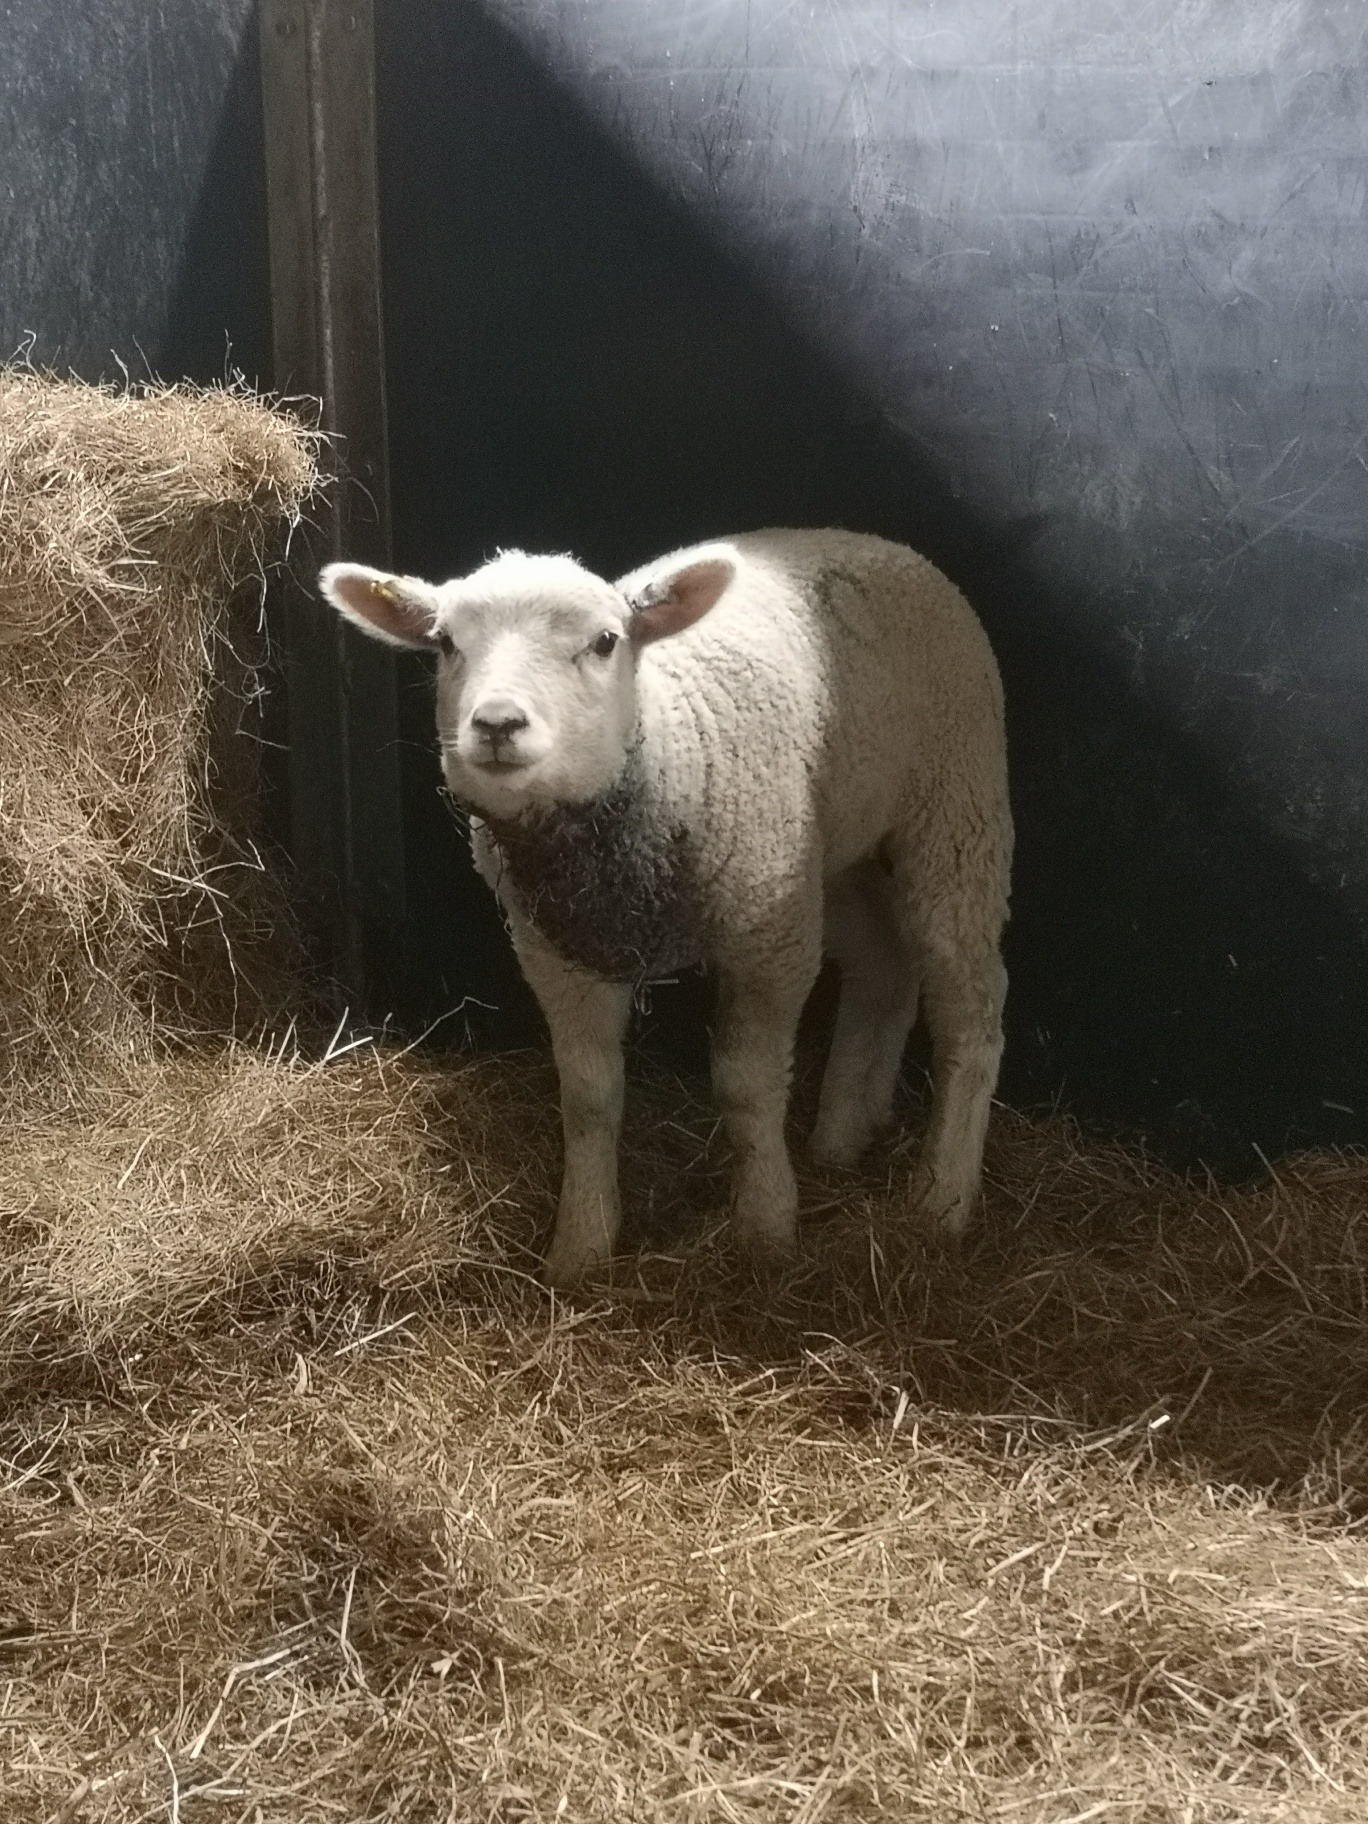 Survivor - little lamb Hope was badly hurt after a dog attack but is now being nursed back to health by the owners of Colletts Farm Dairy